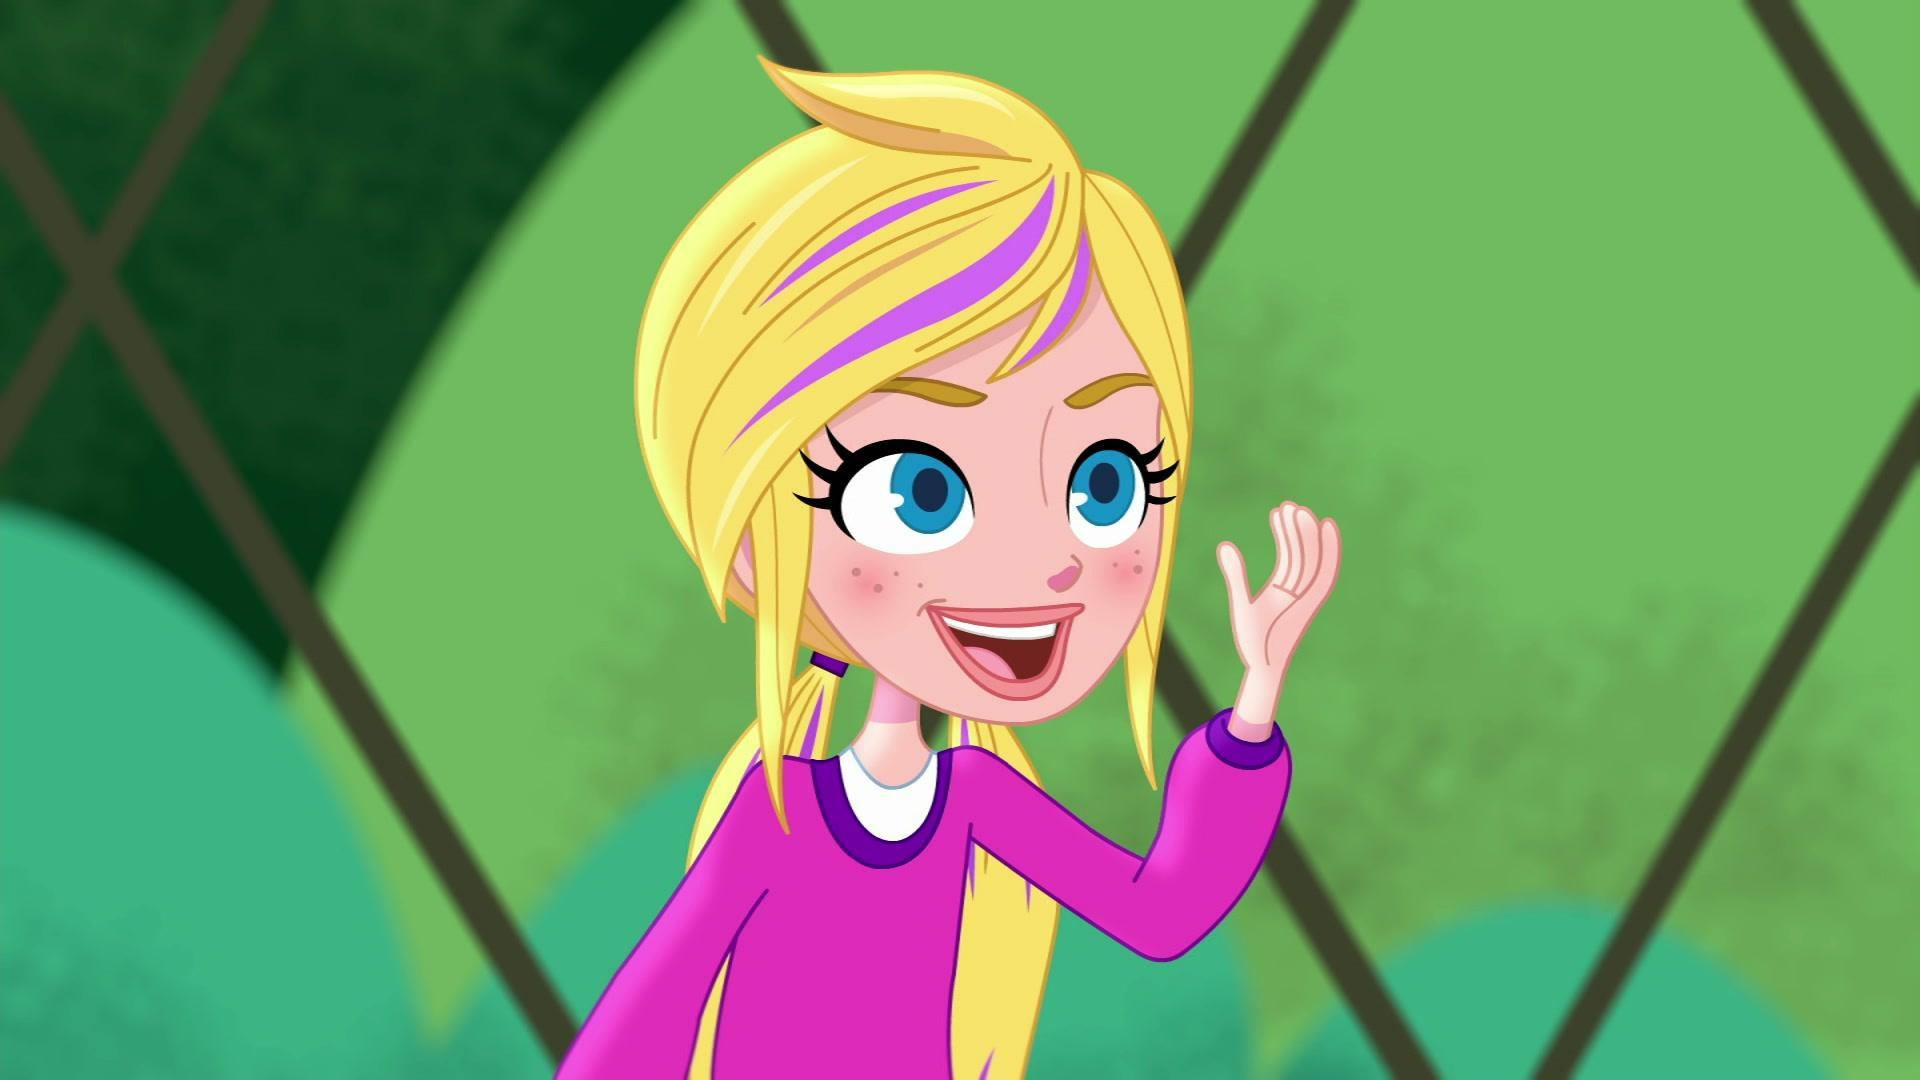 Polly Pocket, Full Episode Compilation Polly and friends